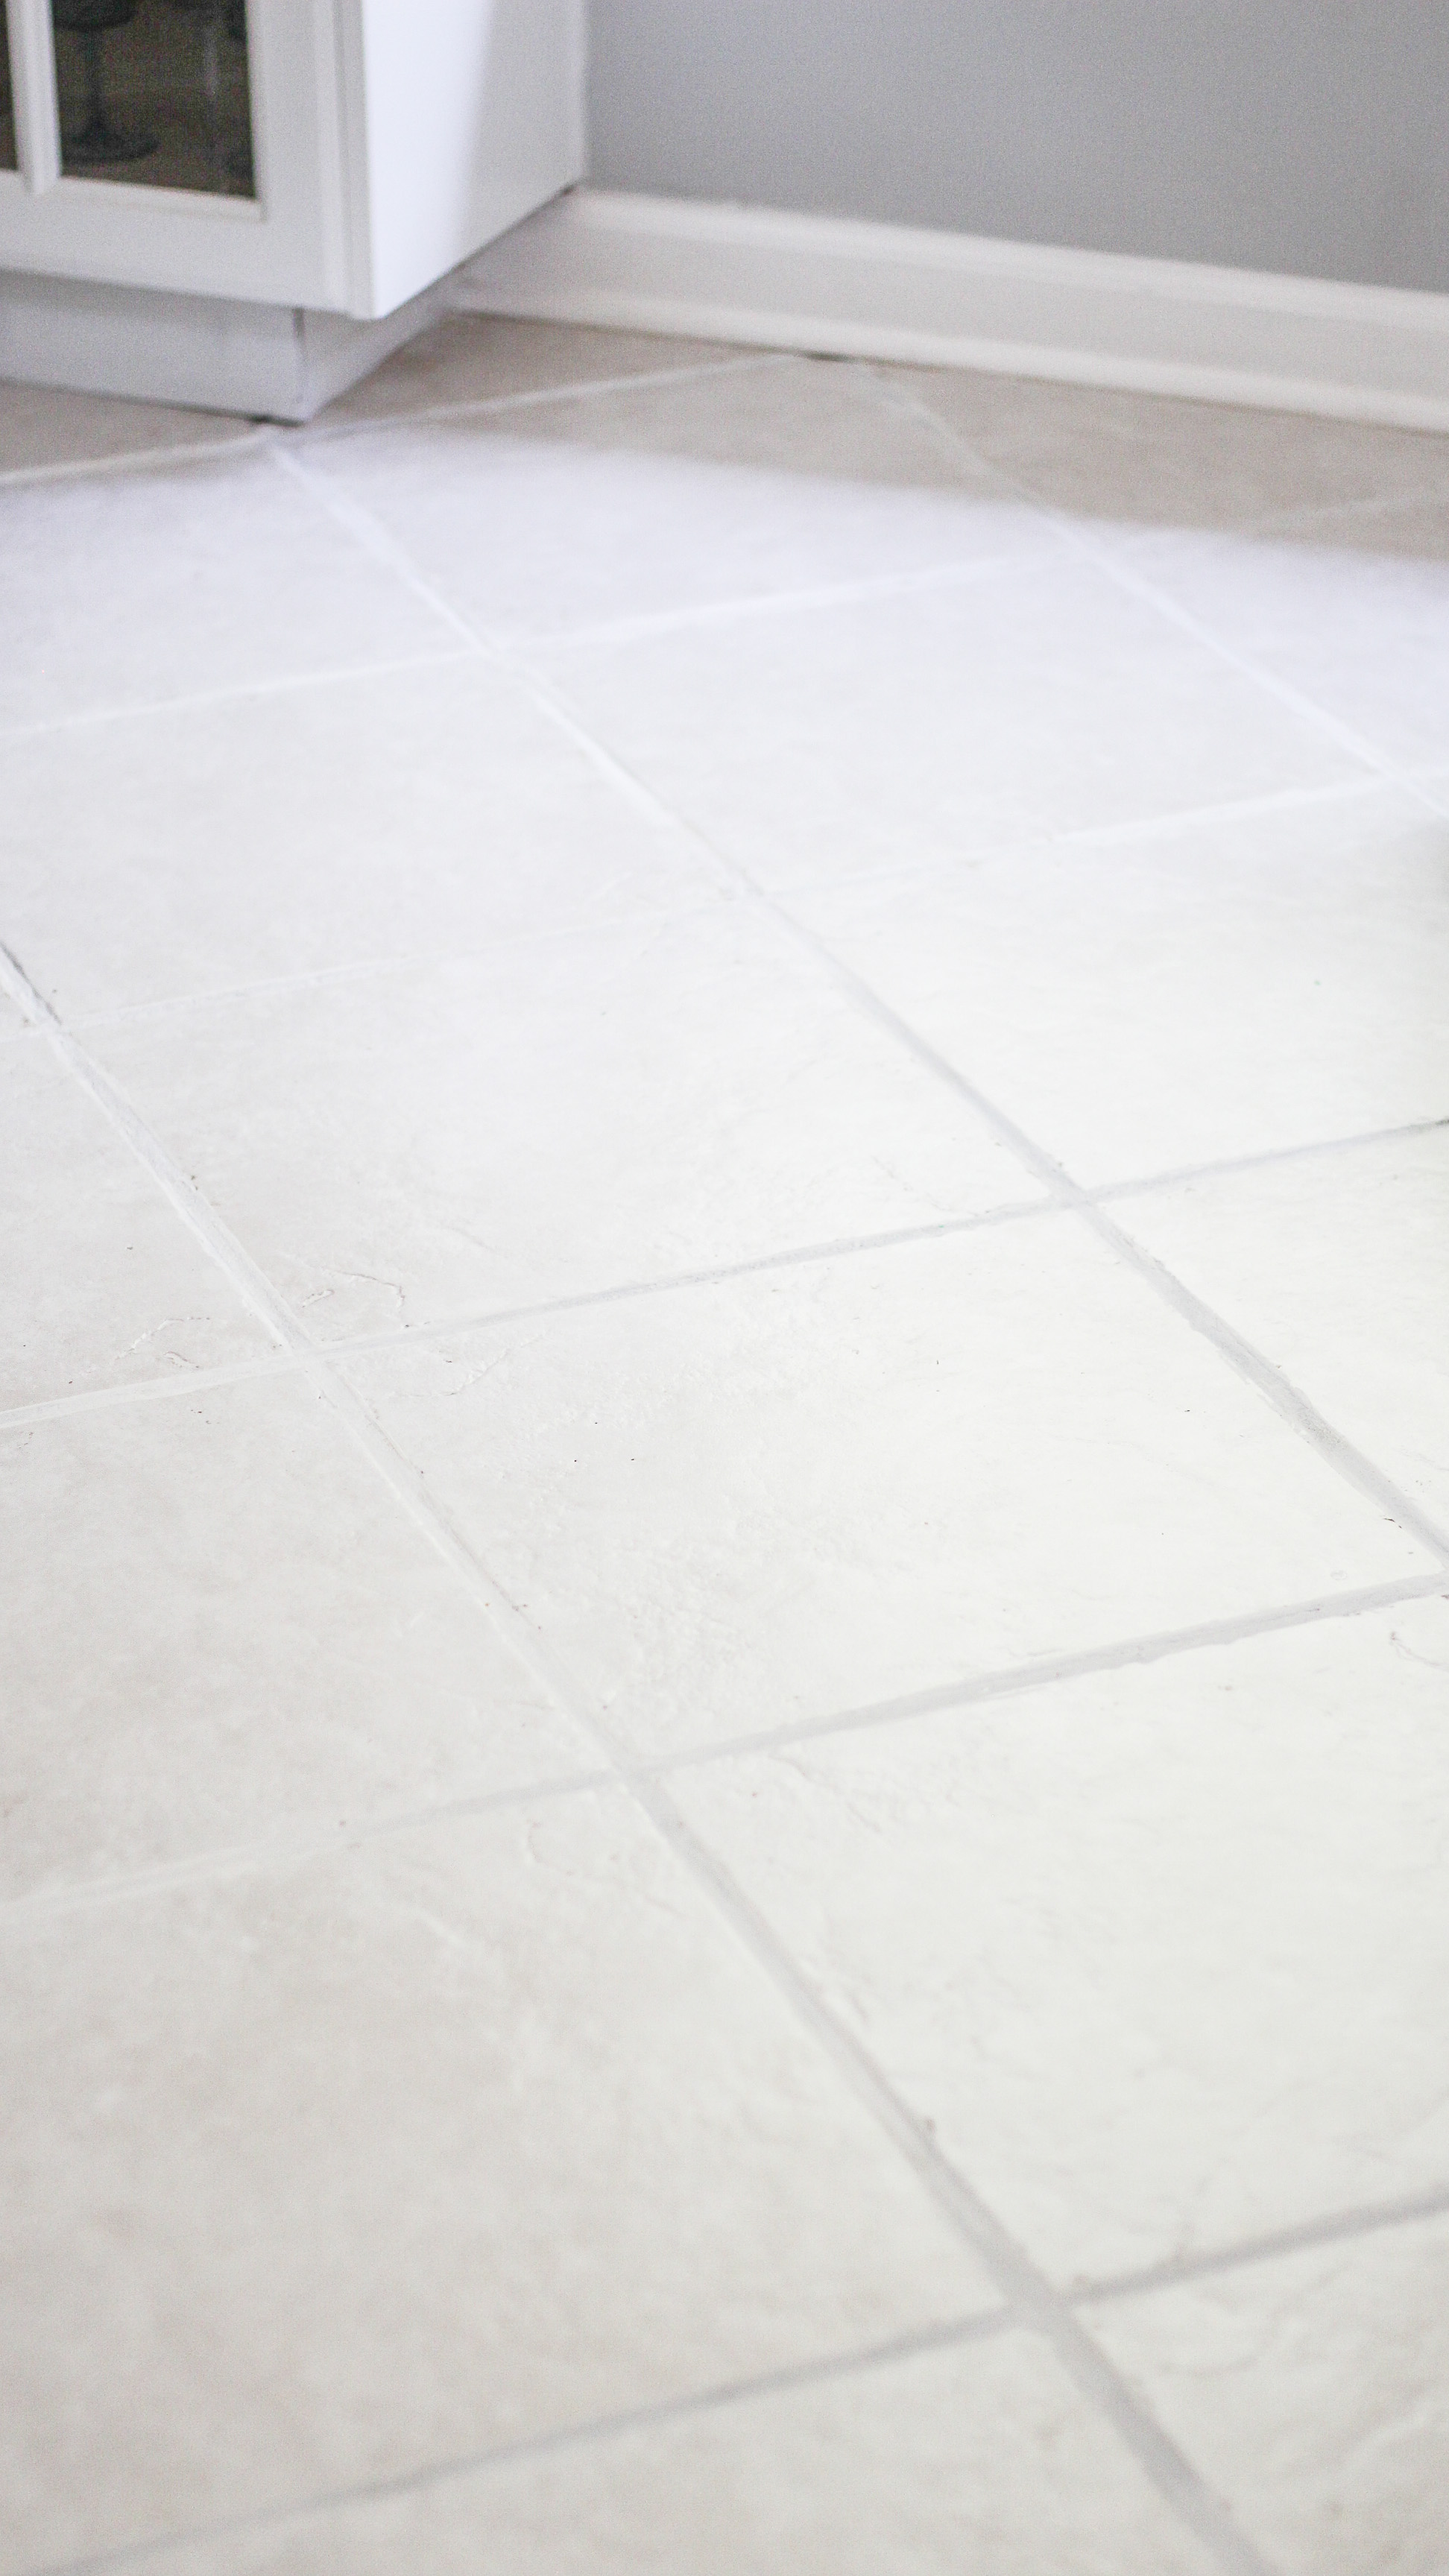 Neglected Tile Flooring, Cleaning White Grout On Floor Tiles